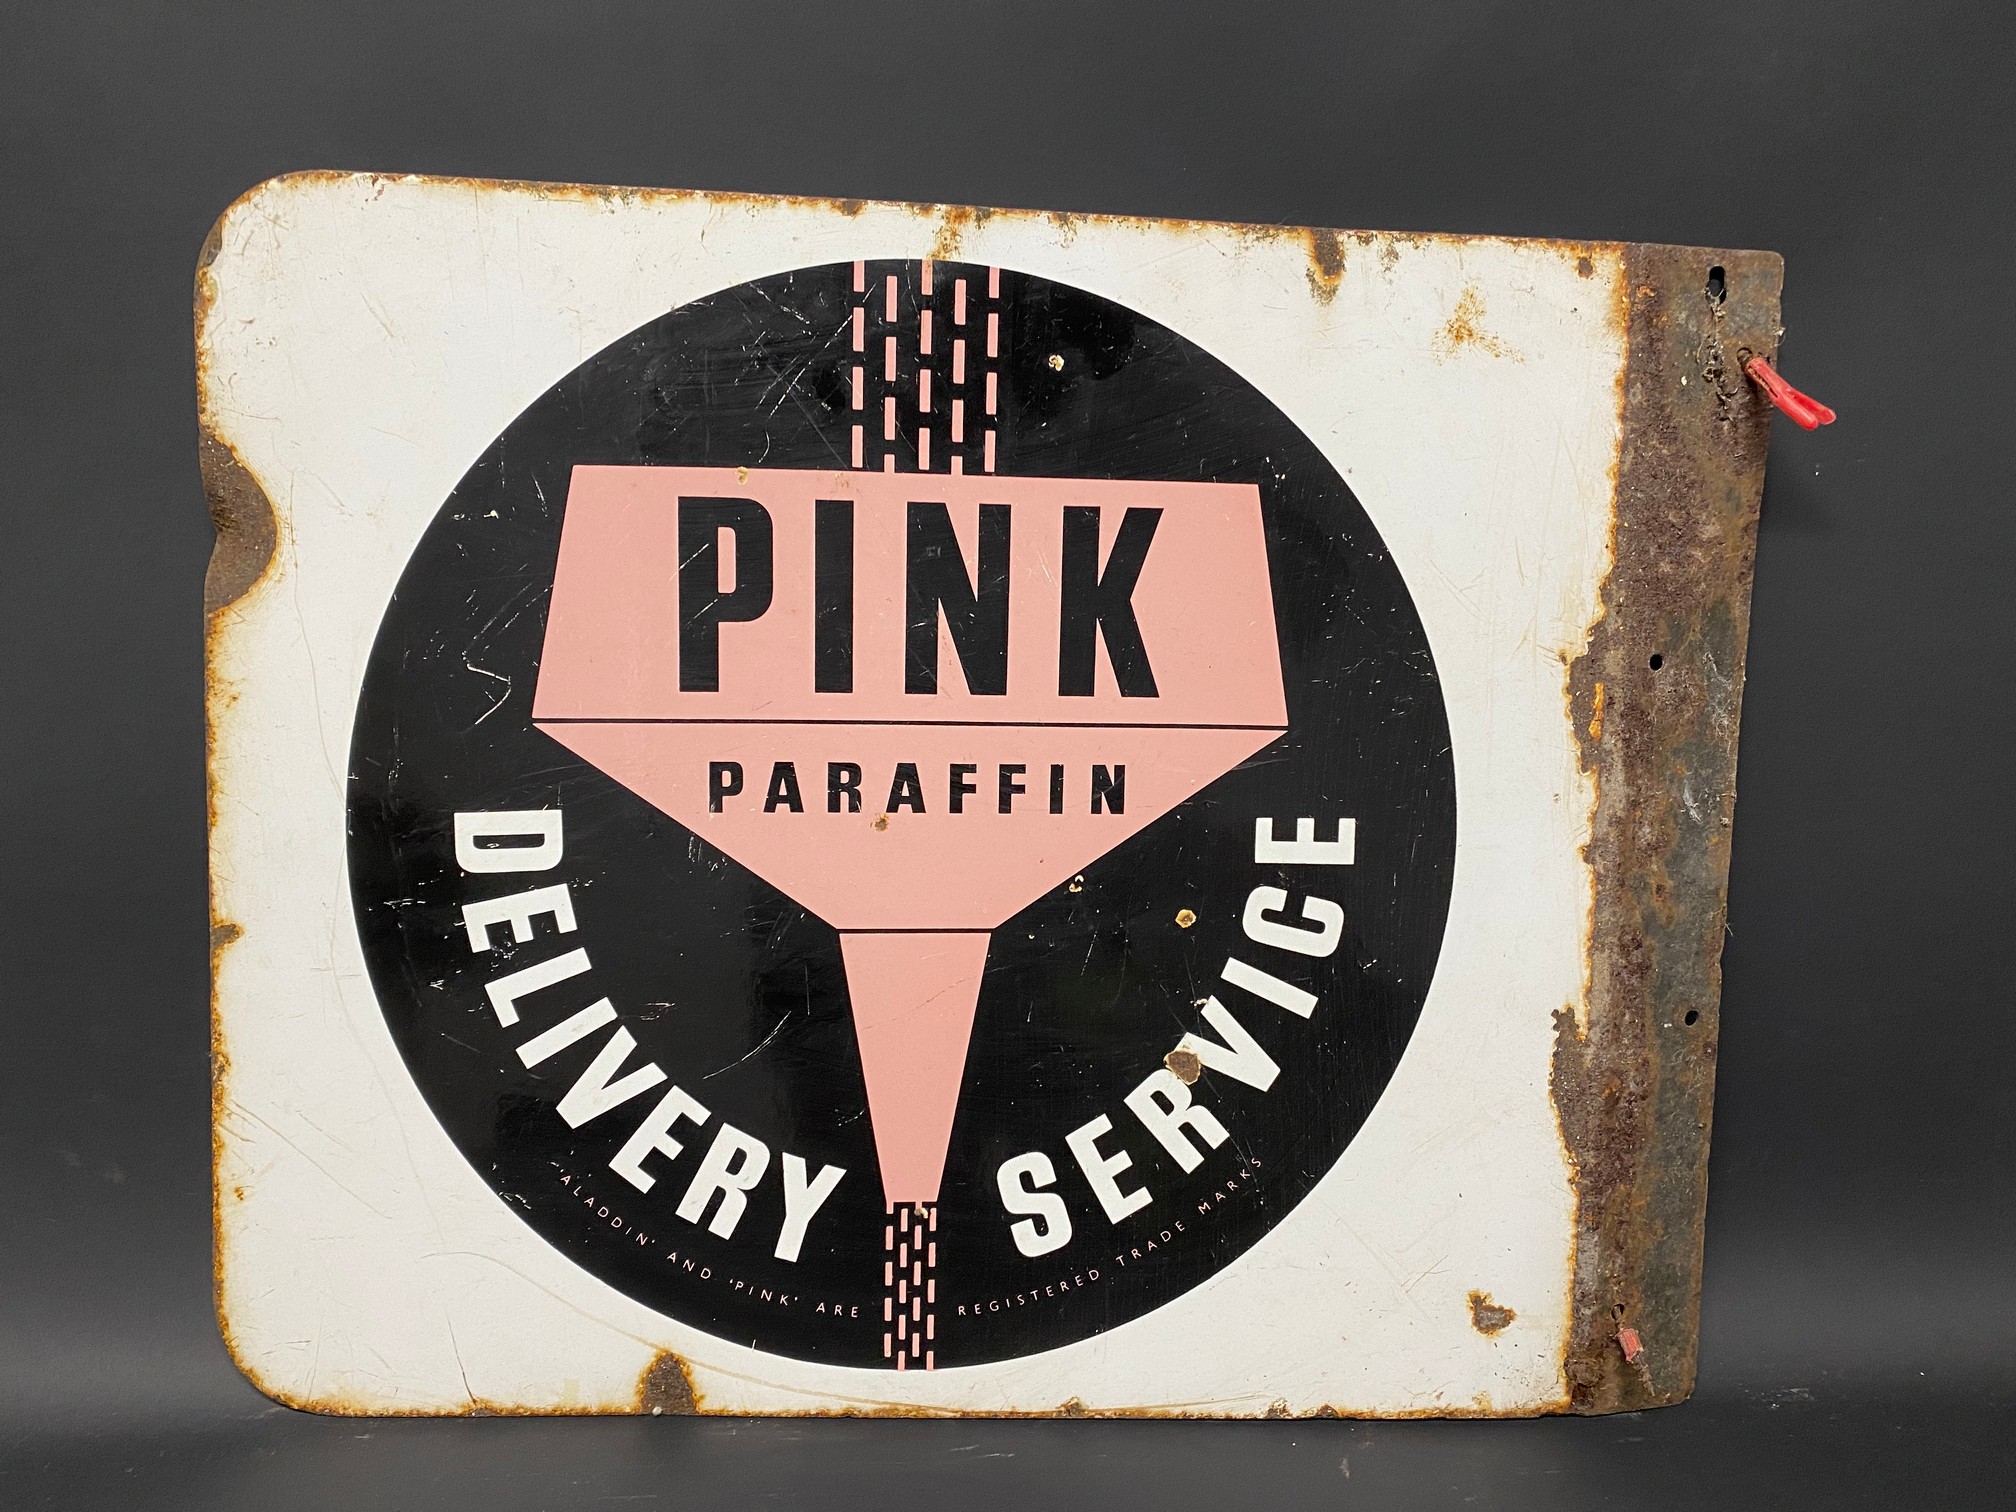 A Pink Paraffin Delivery Service double sided enamel sign with flattened hanging flange, 21 x 16 1/ - Image 2 of 2